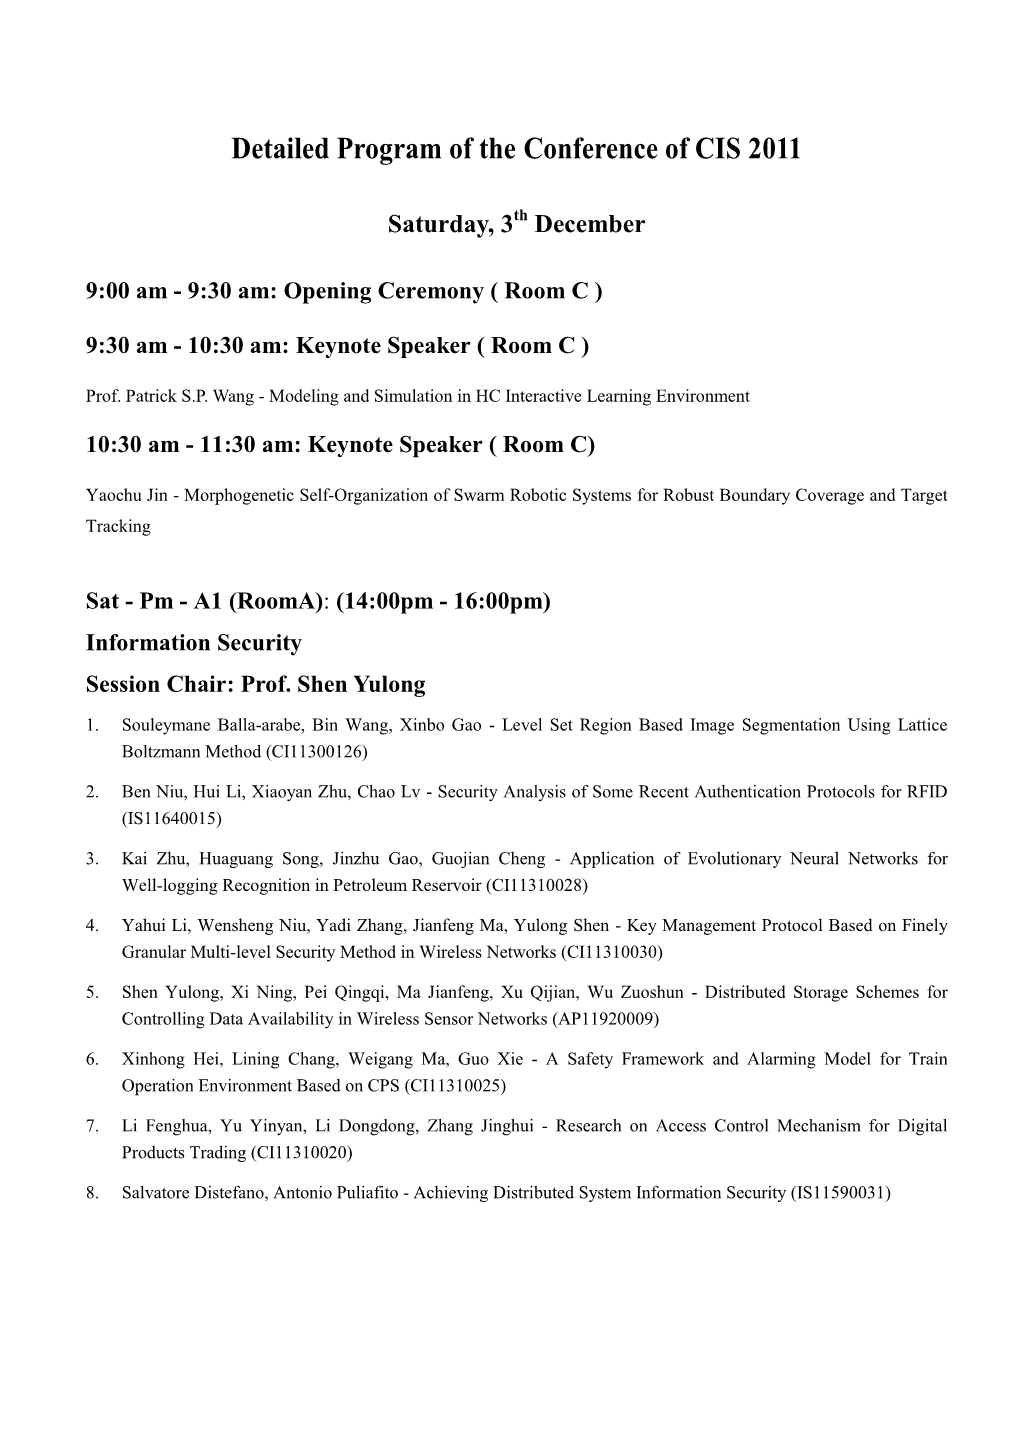 Detailed Program of the Conference of CIS 2011